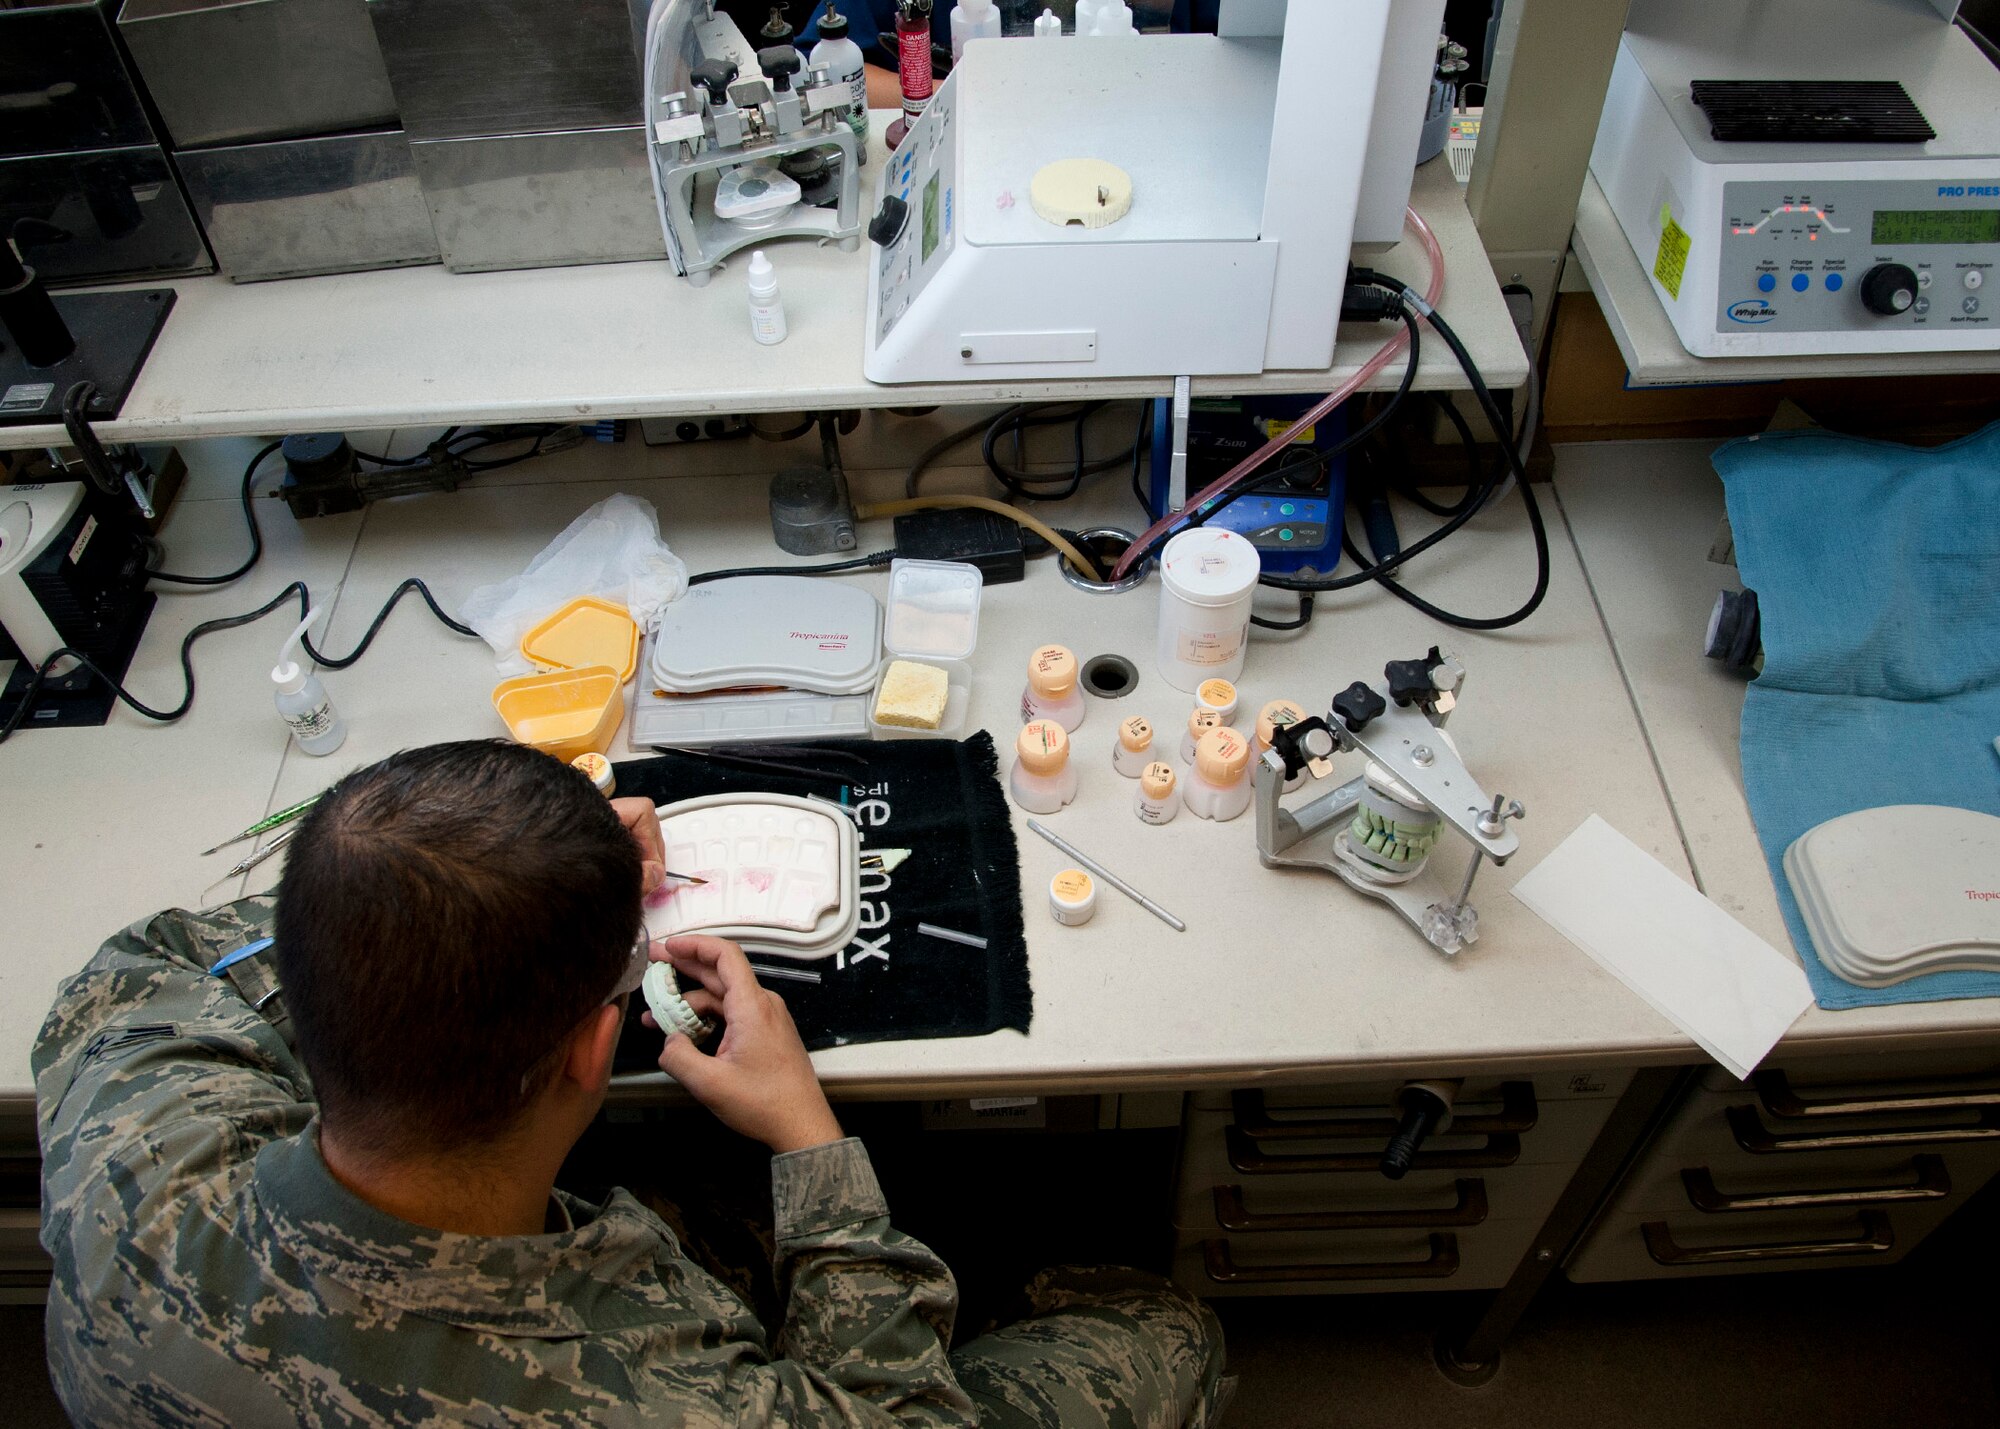 Senior Airman Jonathon Stambaugh, a 21st Dental Squadron dental lab technician, works on creating porcelain teeth at the Area Dental Lab April 8, 2015, on Peterson Air Force Base, Colo. The ADL is one of three Defense Department labs that provide fixed dental works along with removable dental works and services DOD bases around the world. (U.S. Air Force photo/Senior Airman Tiffany DeNault)